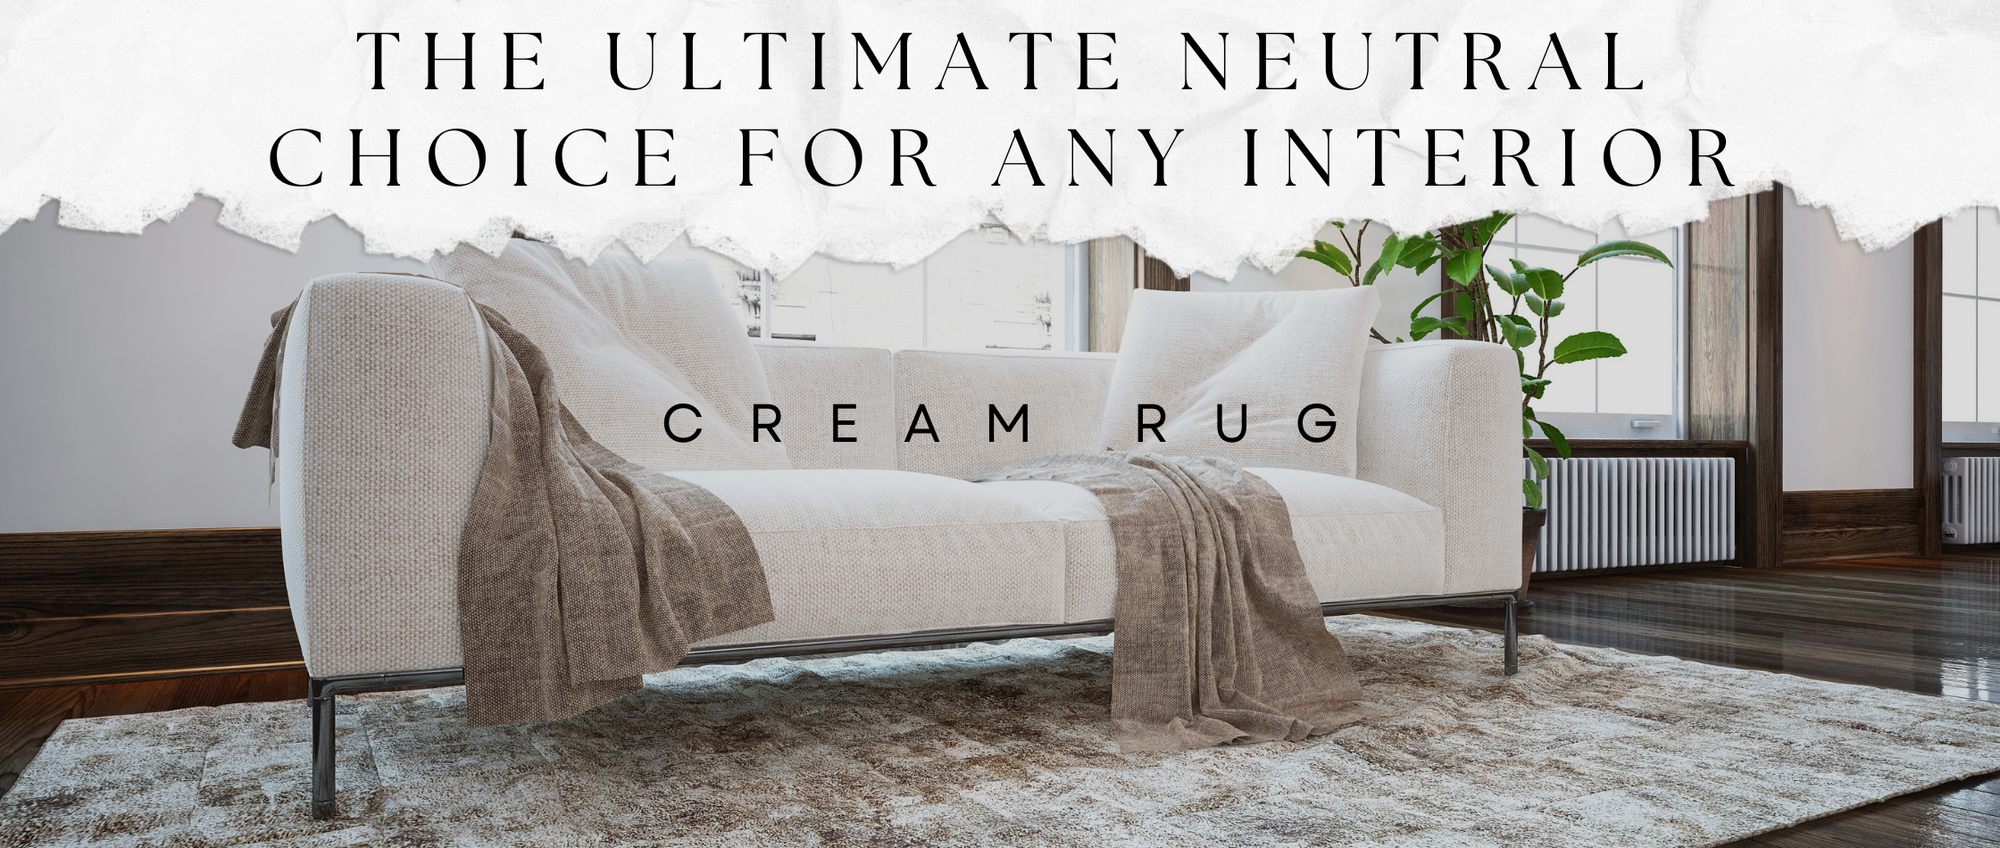 Cream Rug: The Ultimate Neutral Choice for Any Interior